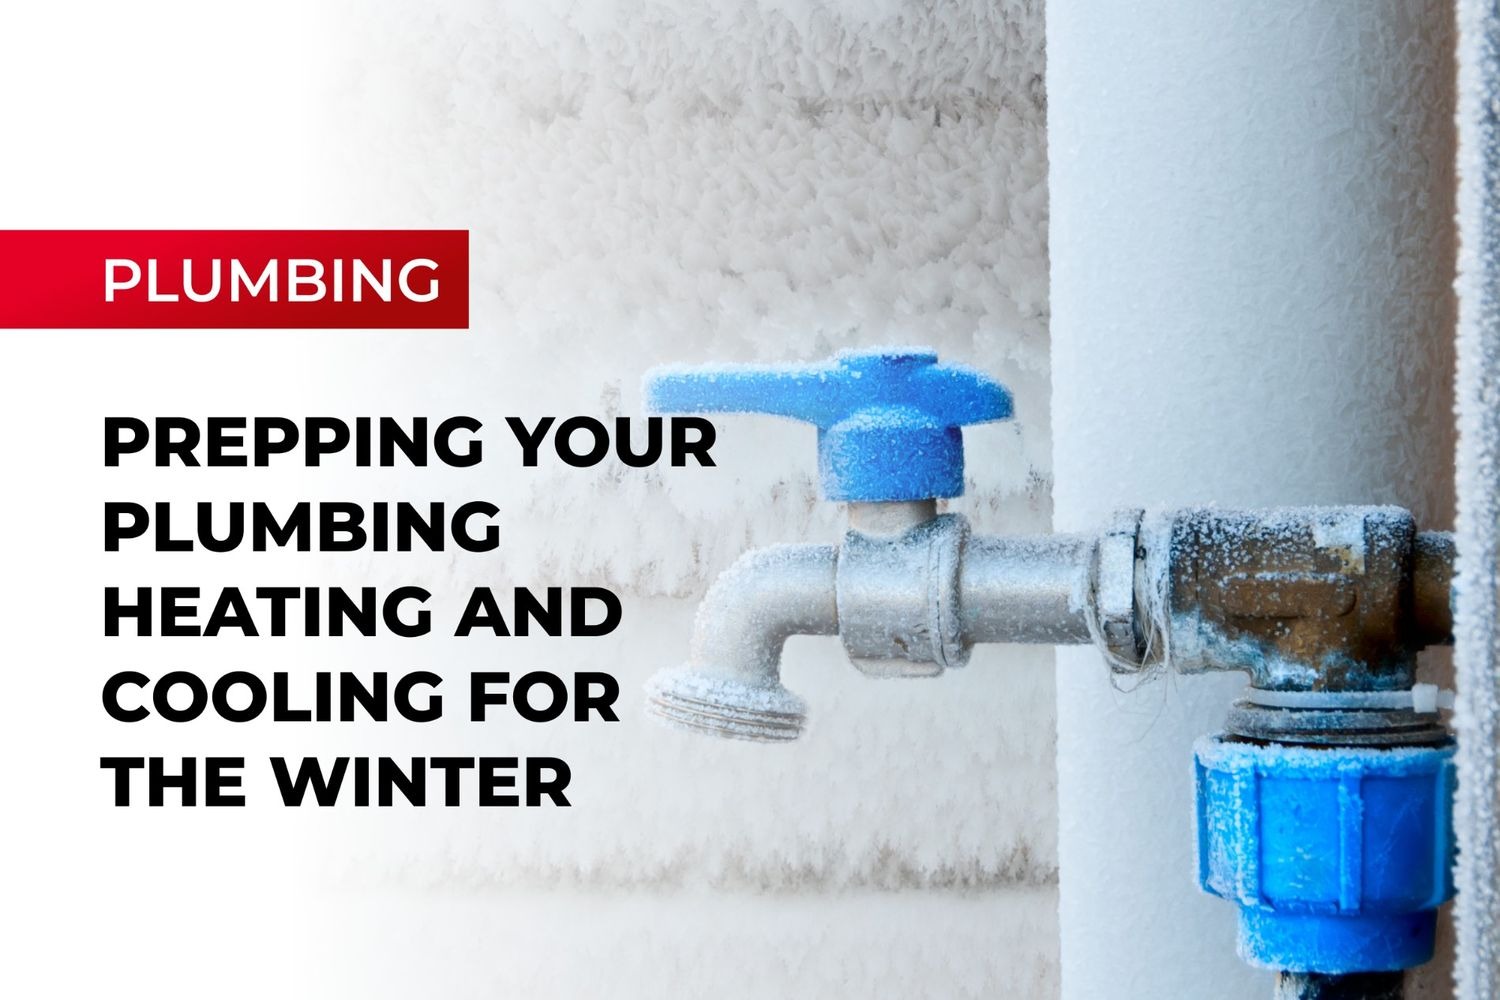 Prepping your plumbing, heating and cooling for winter